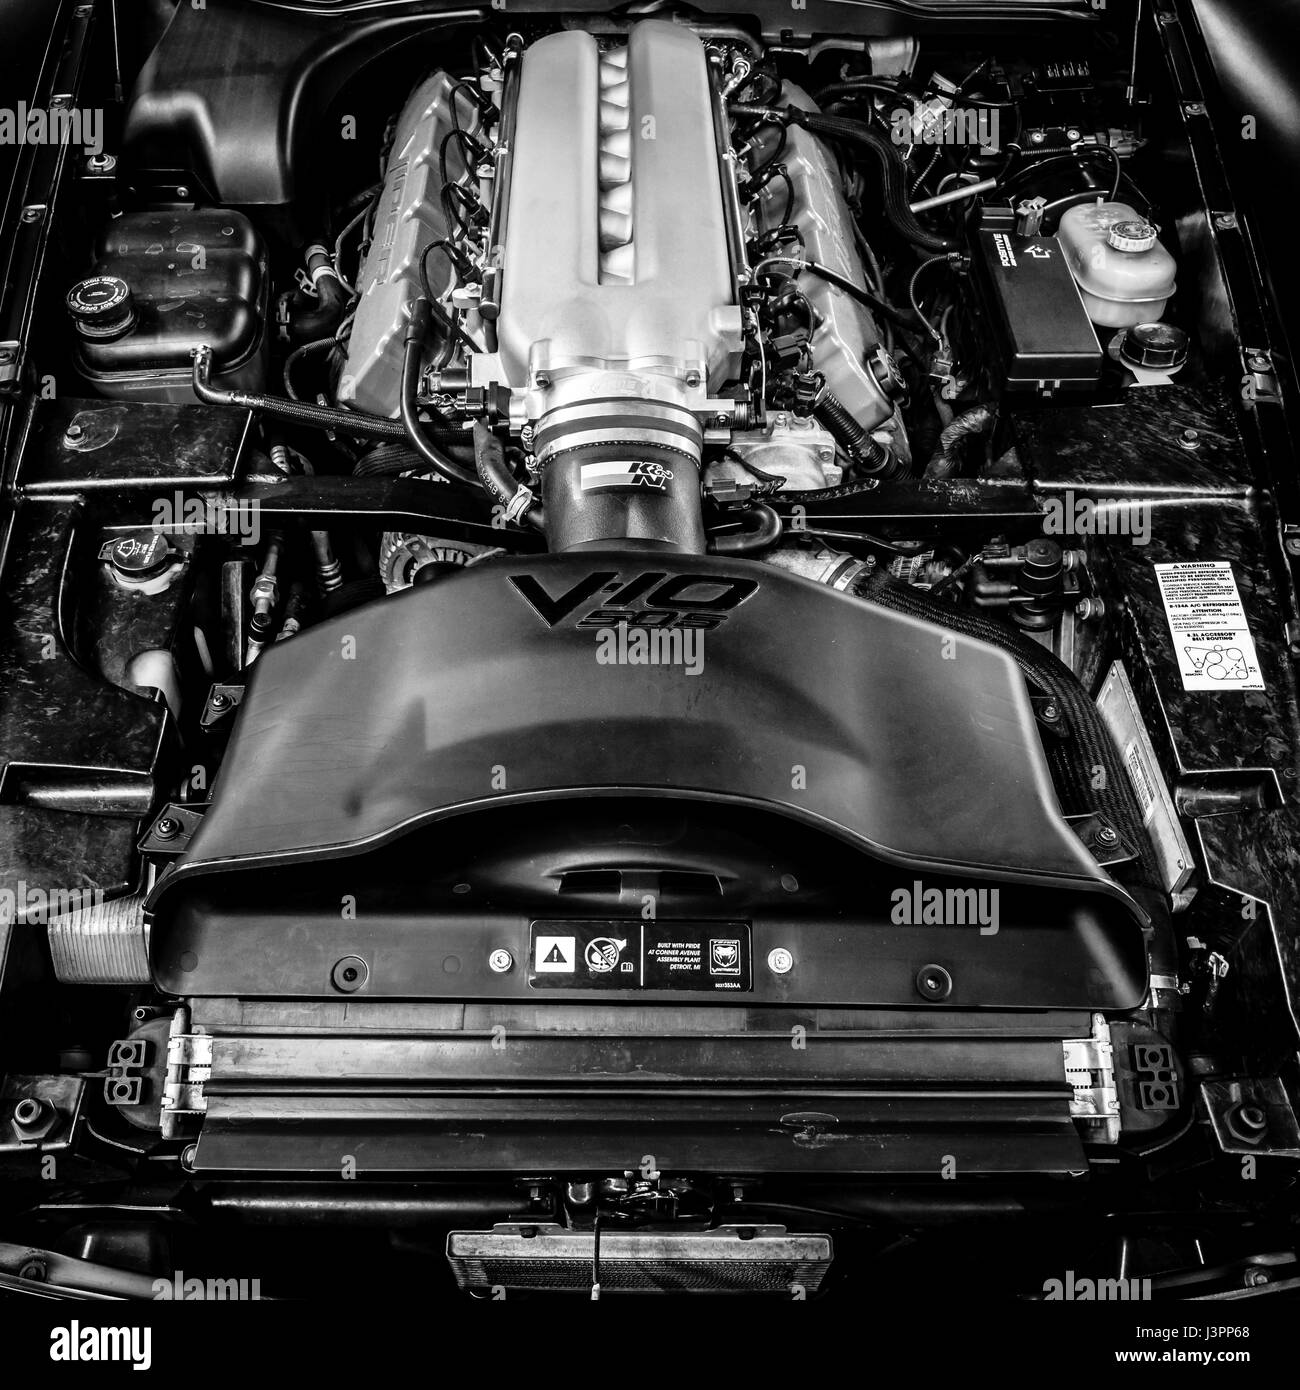 STUTTGART, GERMANY - MARCH 03, 2017: Engine of sports car Dodge Viper SRT-10, 2006. Black and white. Close-up. Europe's greatest classic car exhibition 'RETRO CLASSICS' Stock Photo